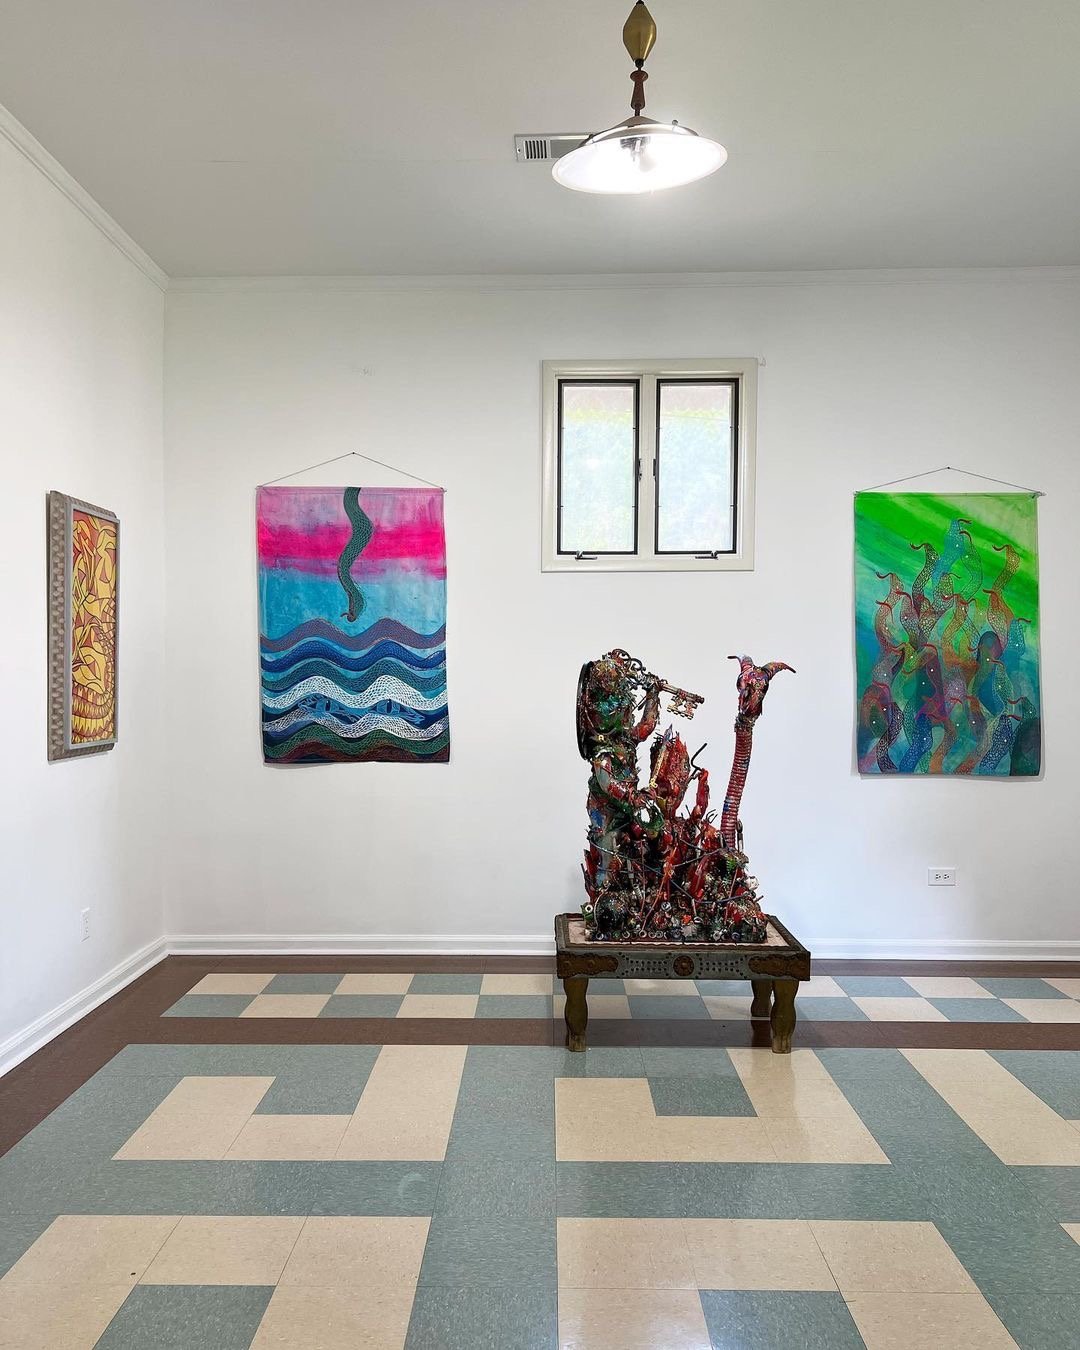  Installation view at Pasaquan, St. EOM, Merrilee Challiss and Robert Morgan 